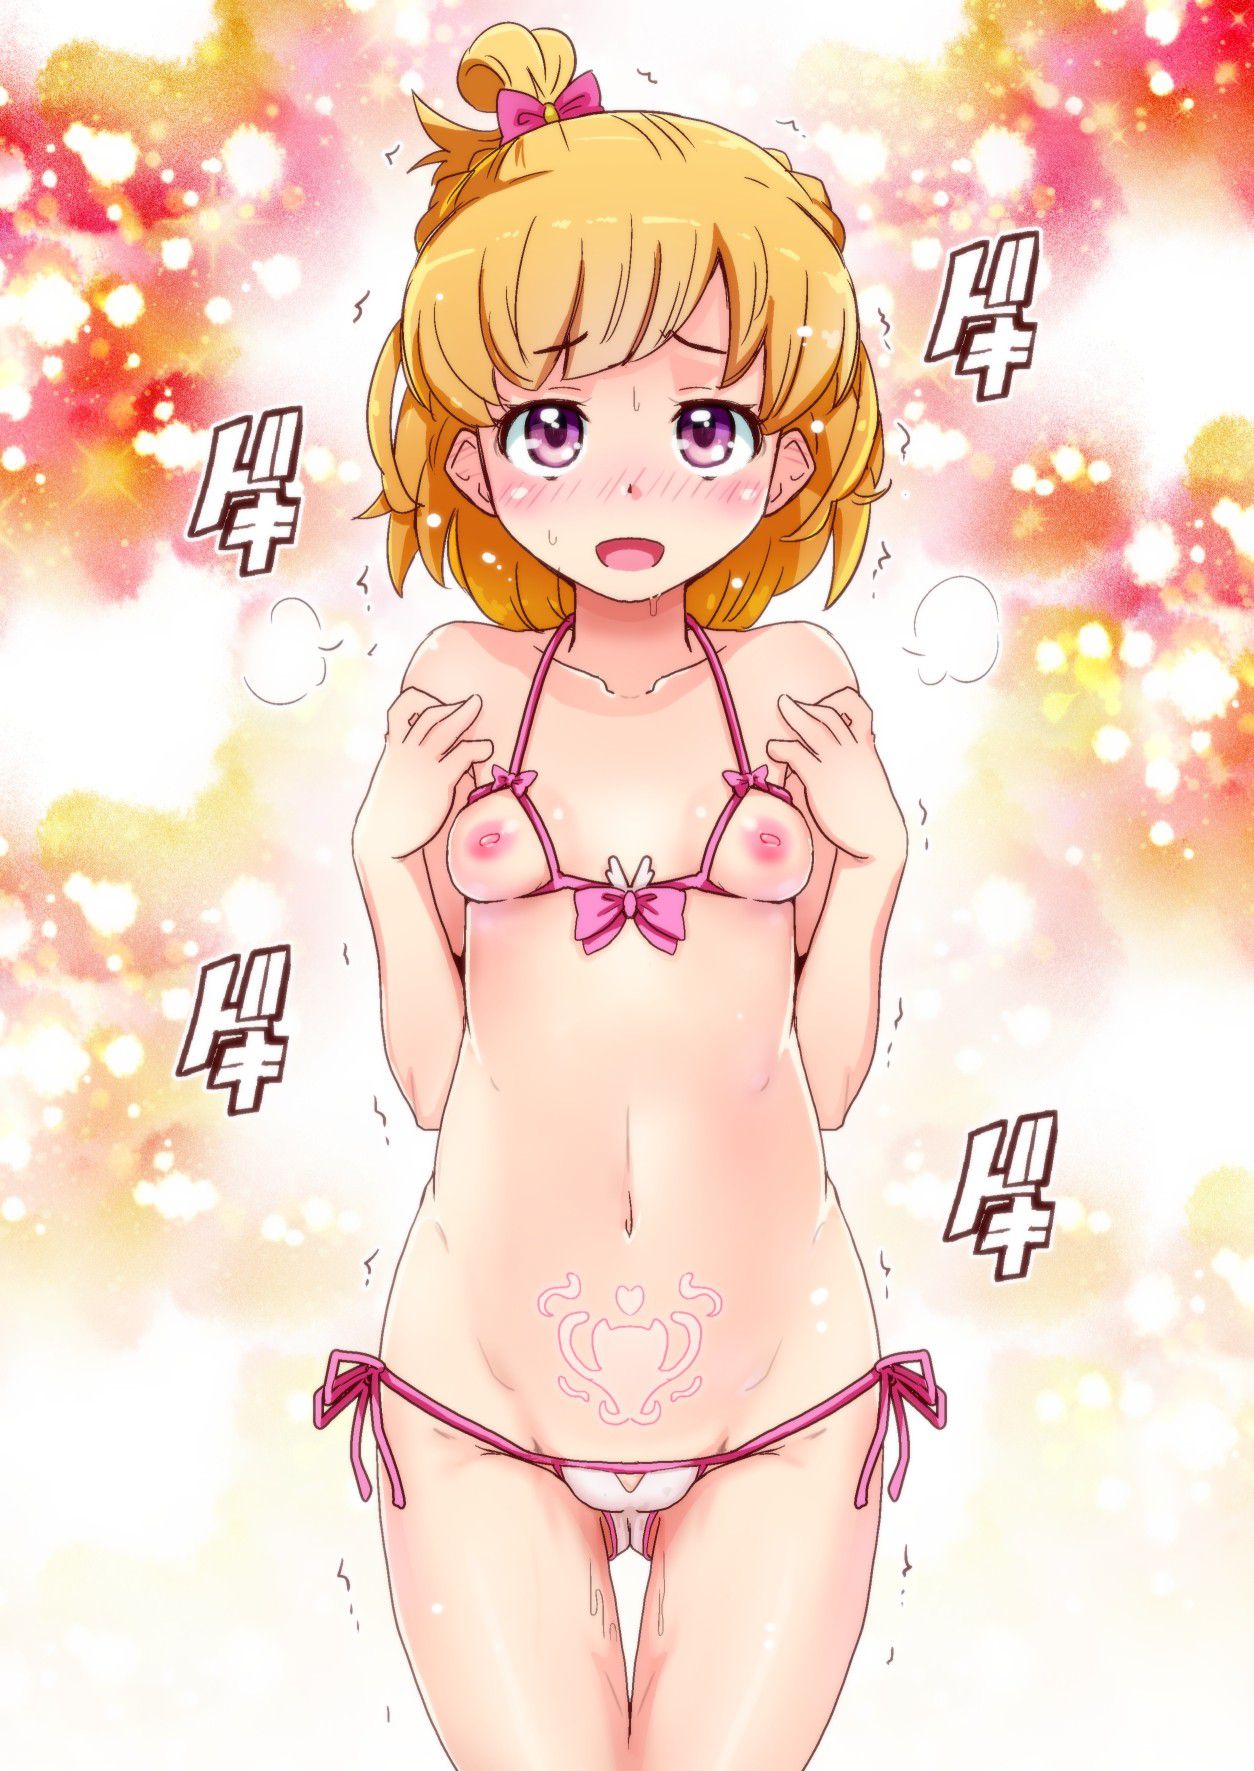 There is no meaning like this www two-dimensional erotic image of a girl wearing such echiechi underwear 12